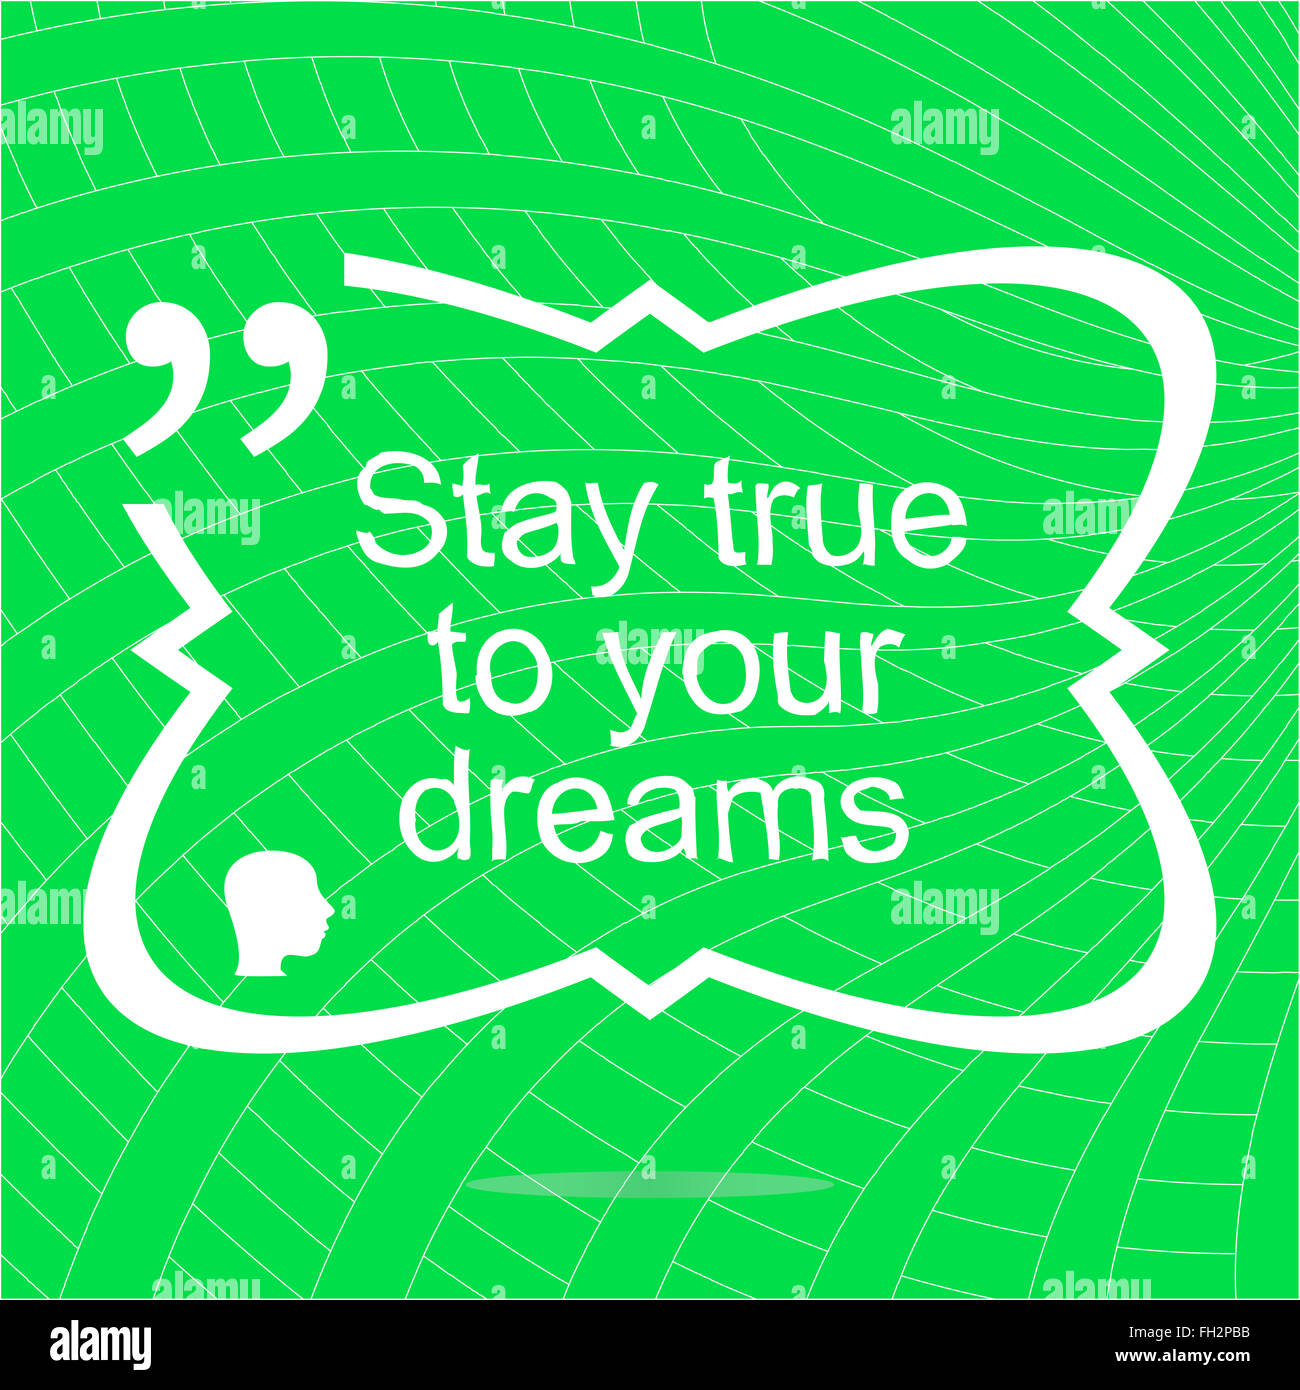 Stay true to your dreams. Inspirational motivational quote. Simple trendy design. Positive quote Stock Photo